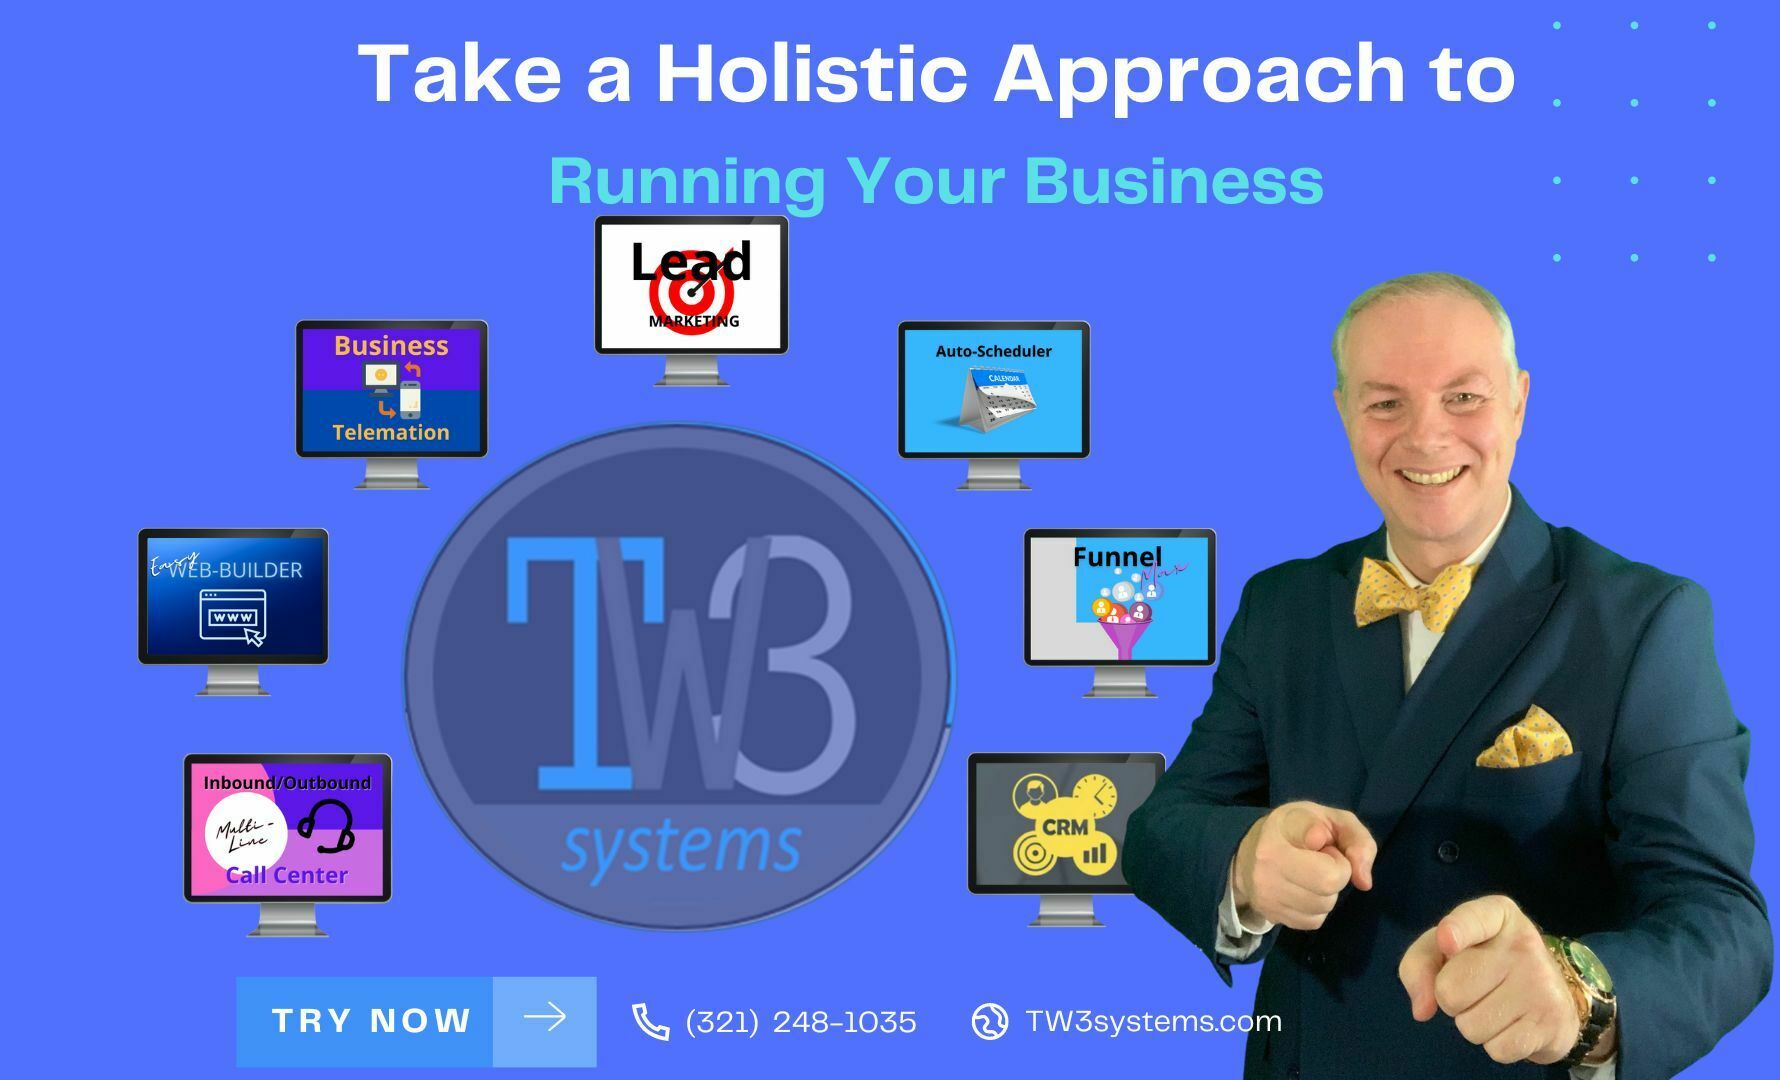 Take a Holistic Approach to Running Your Business